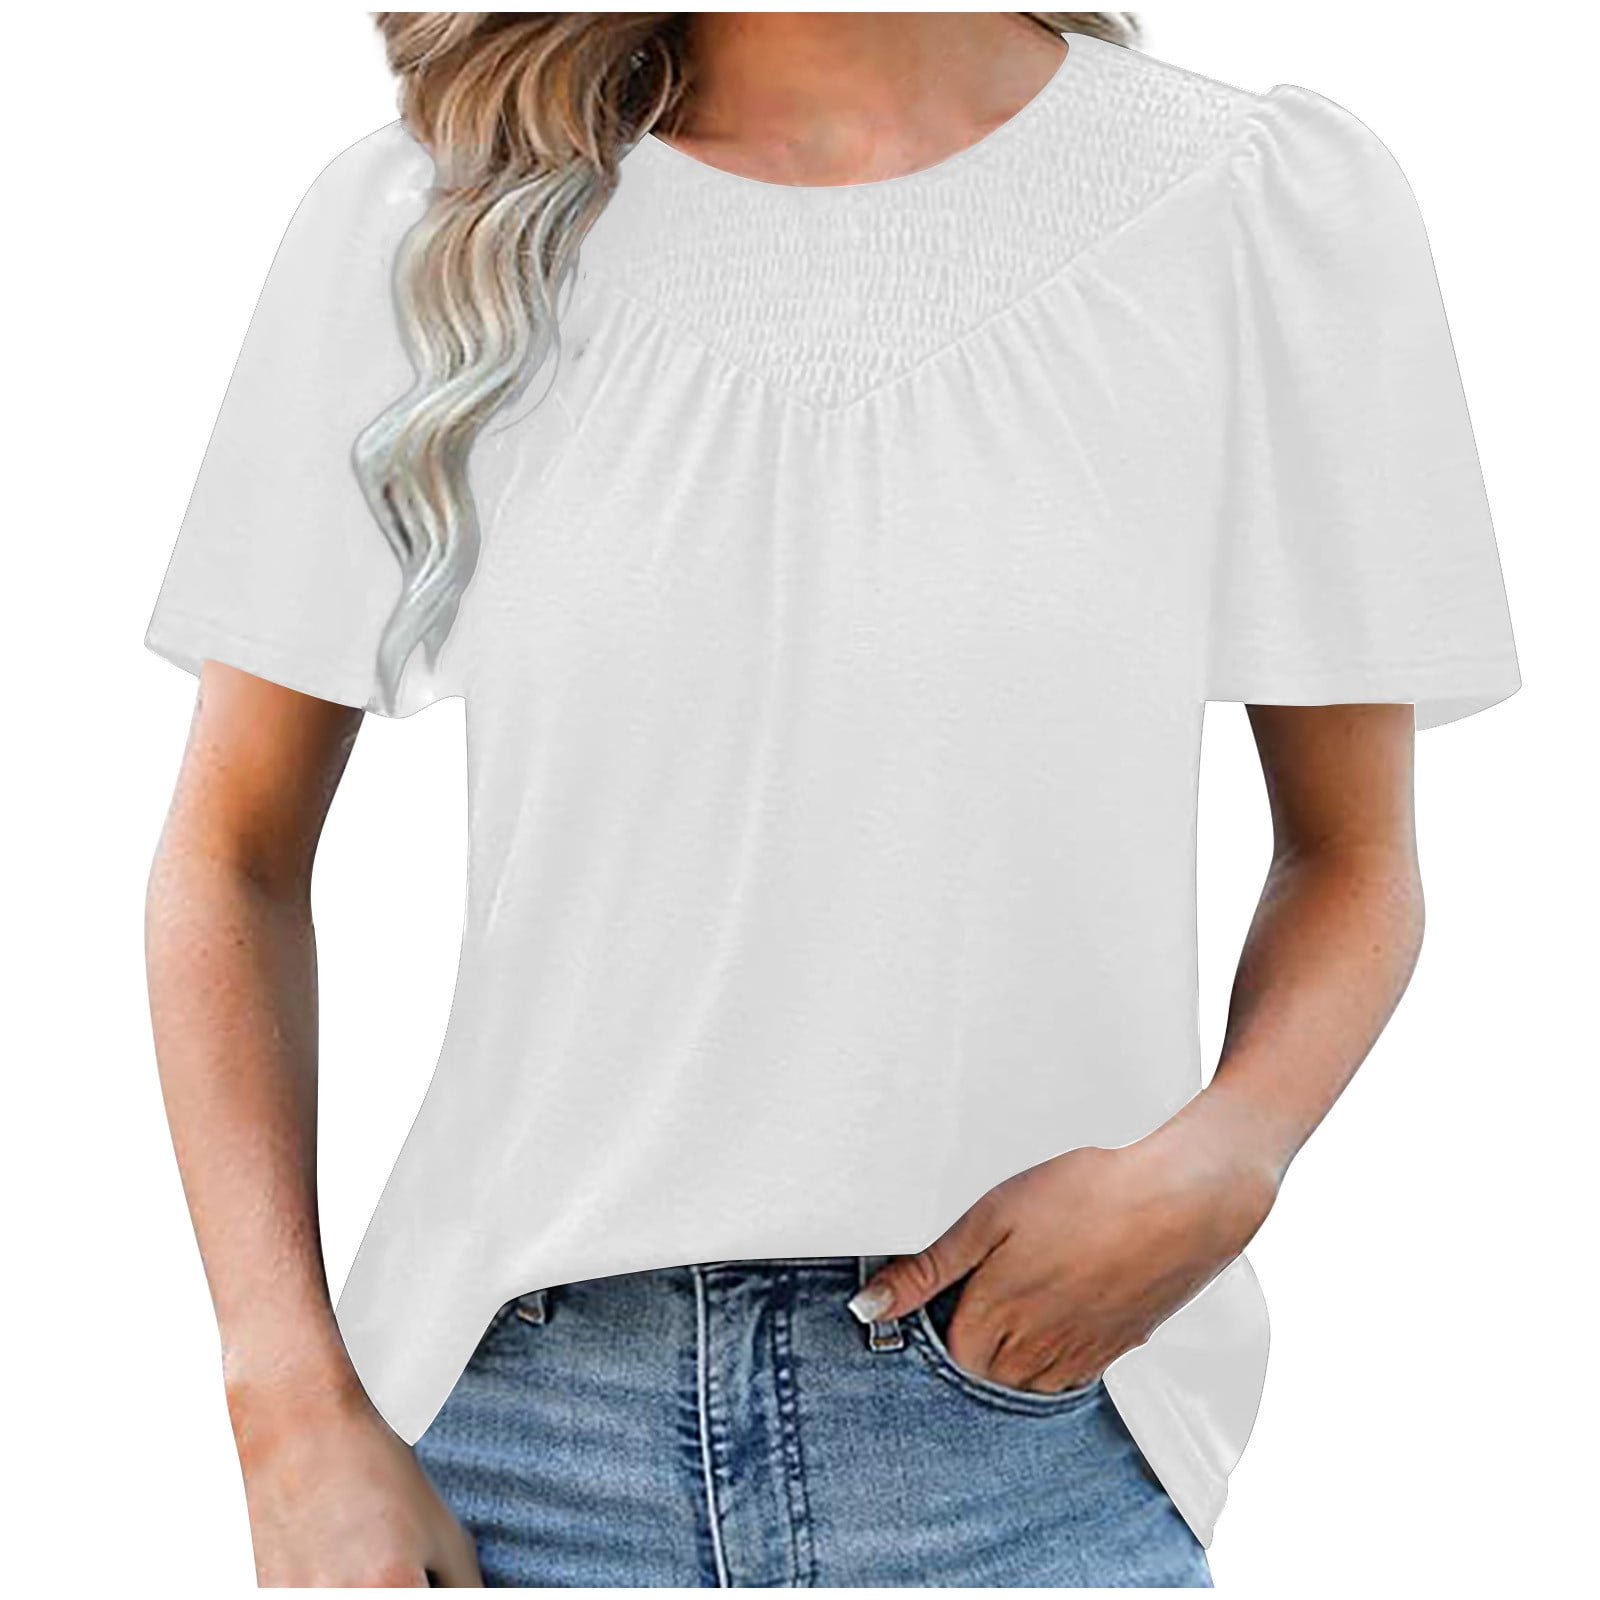 YYDGH Womens Summer Tops Crew Neck Pleated Short Sleeve Tunic Tops ...